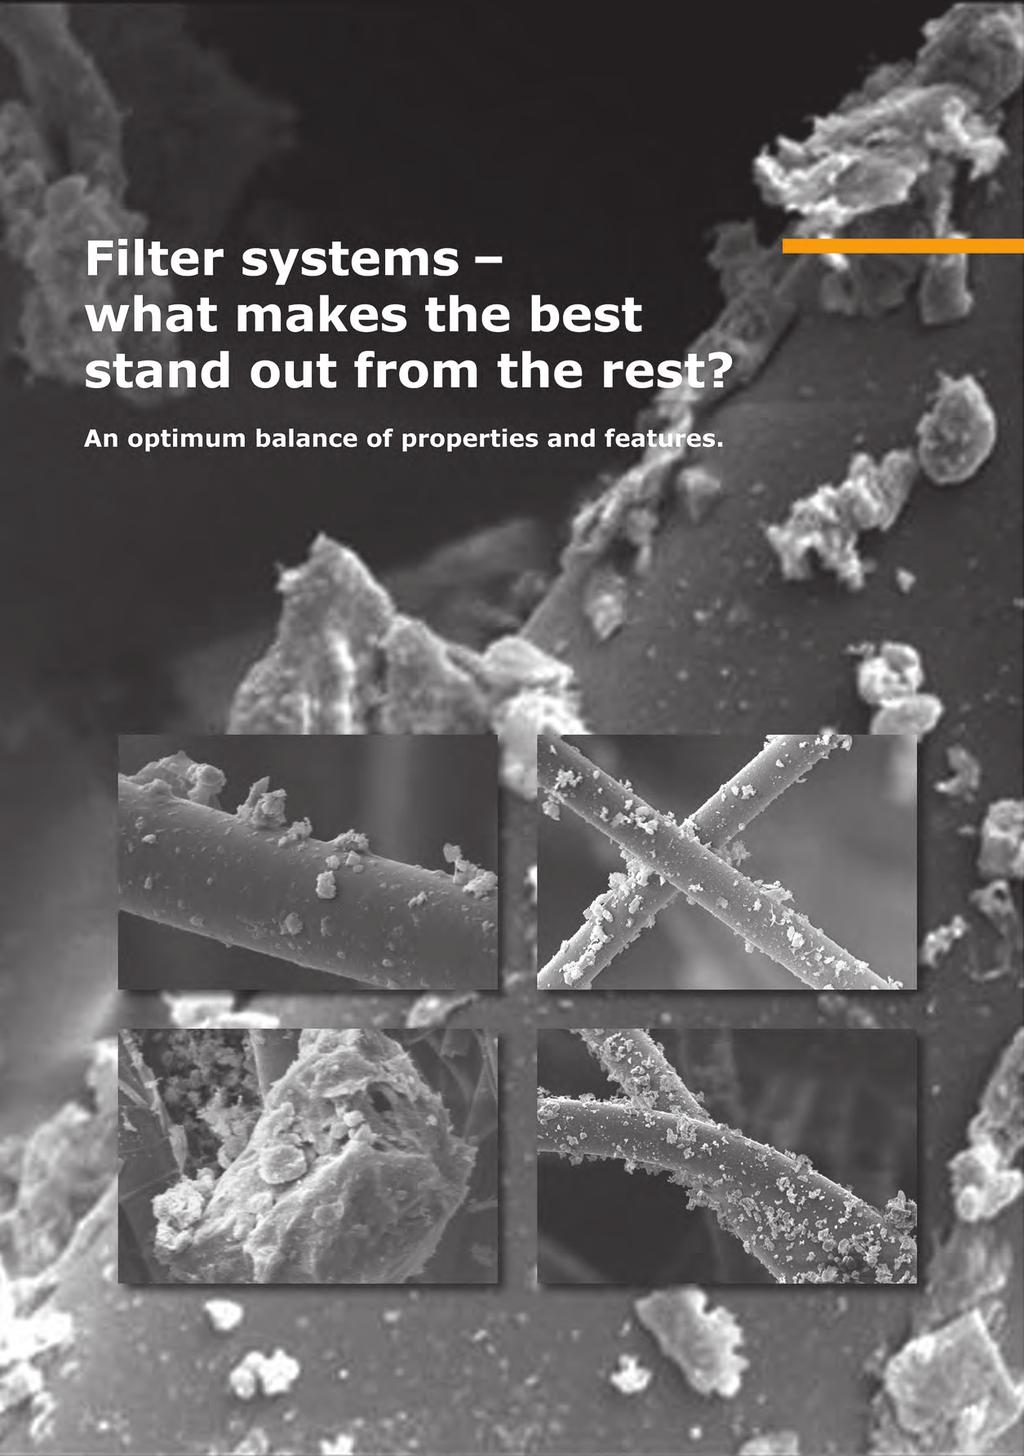 Filter systems what makes the best stand out from the rest An optimum balance of properties and features.